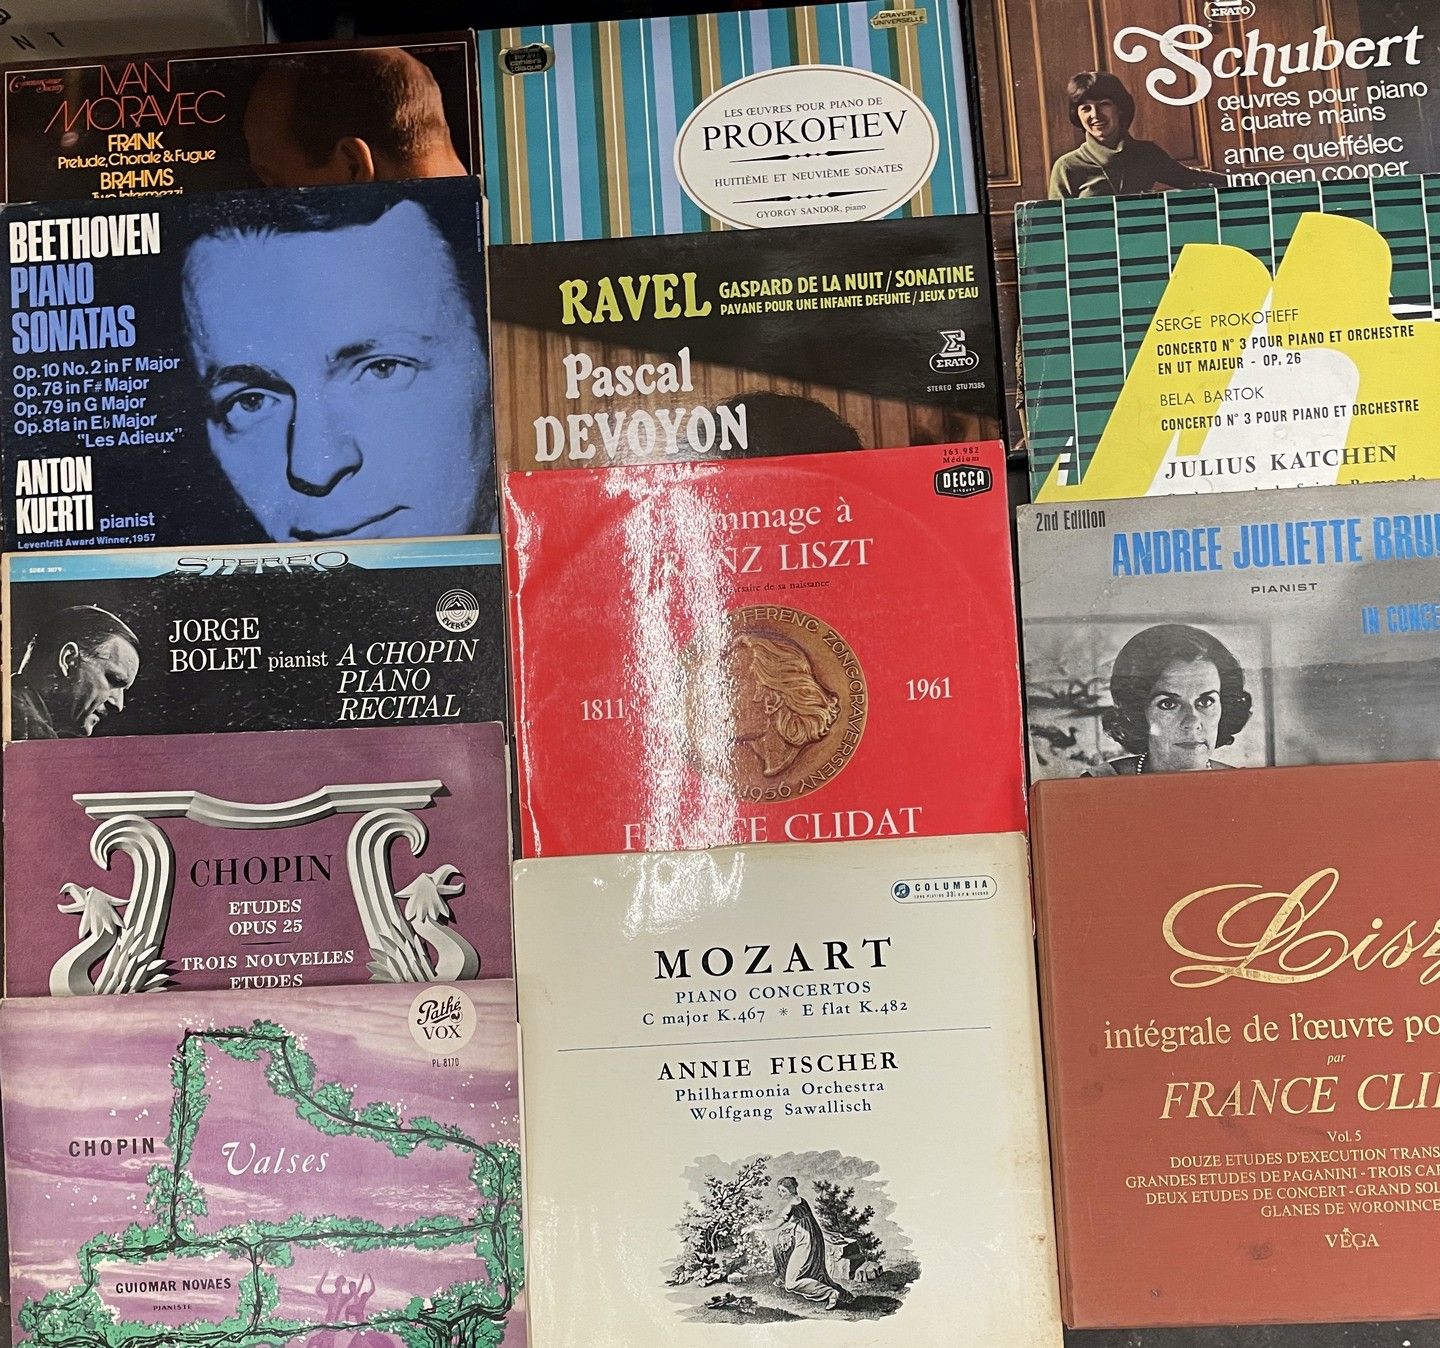 PIANO 13 x Lps/boxes (Lps) - Piano, various Performers, various Labels

VG to EX&hellip;